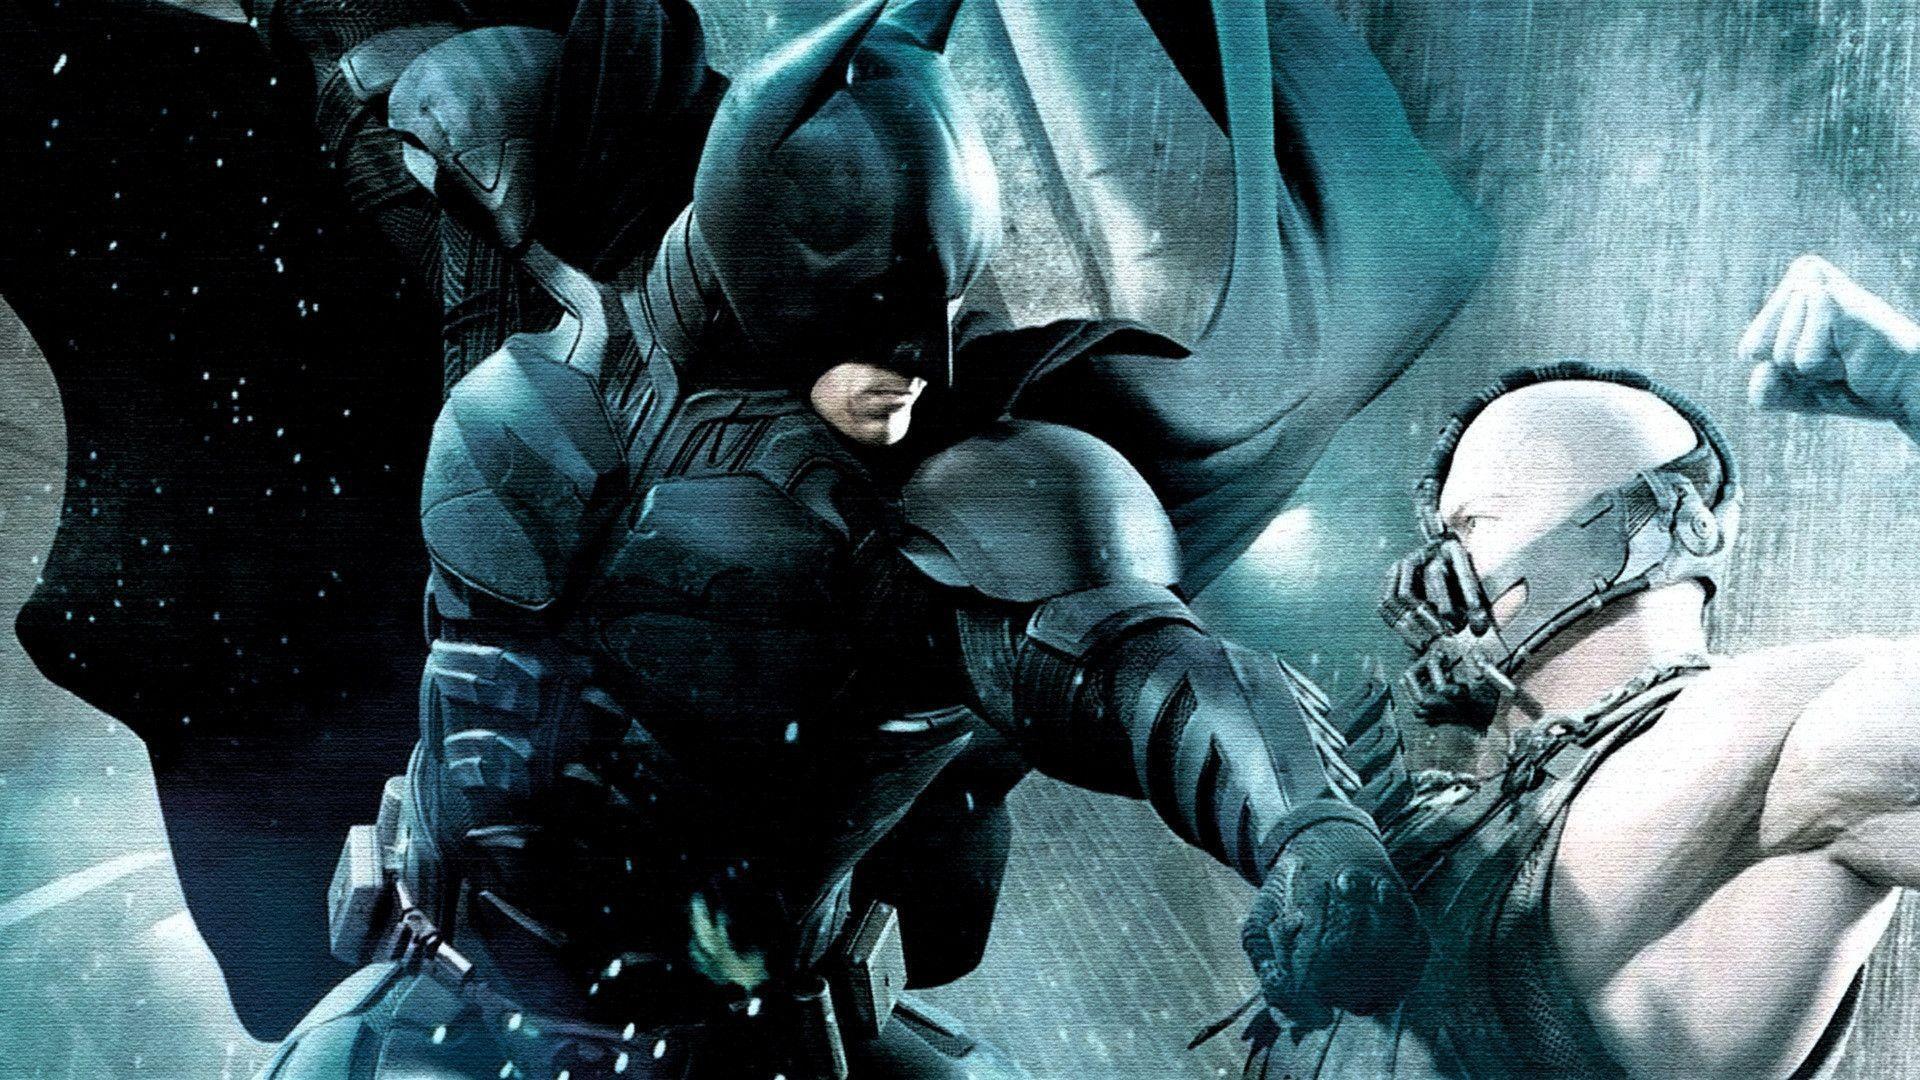 Image For > Batman Hd Wallpapers 1920x1080